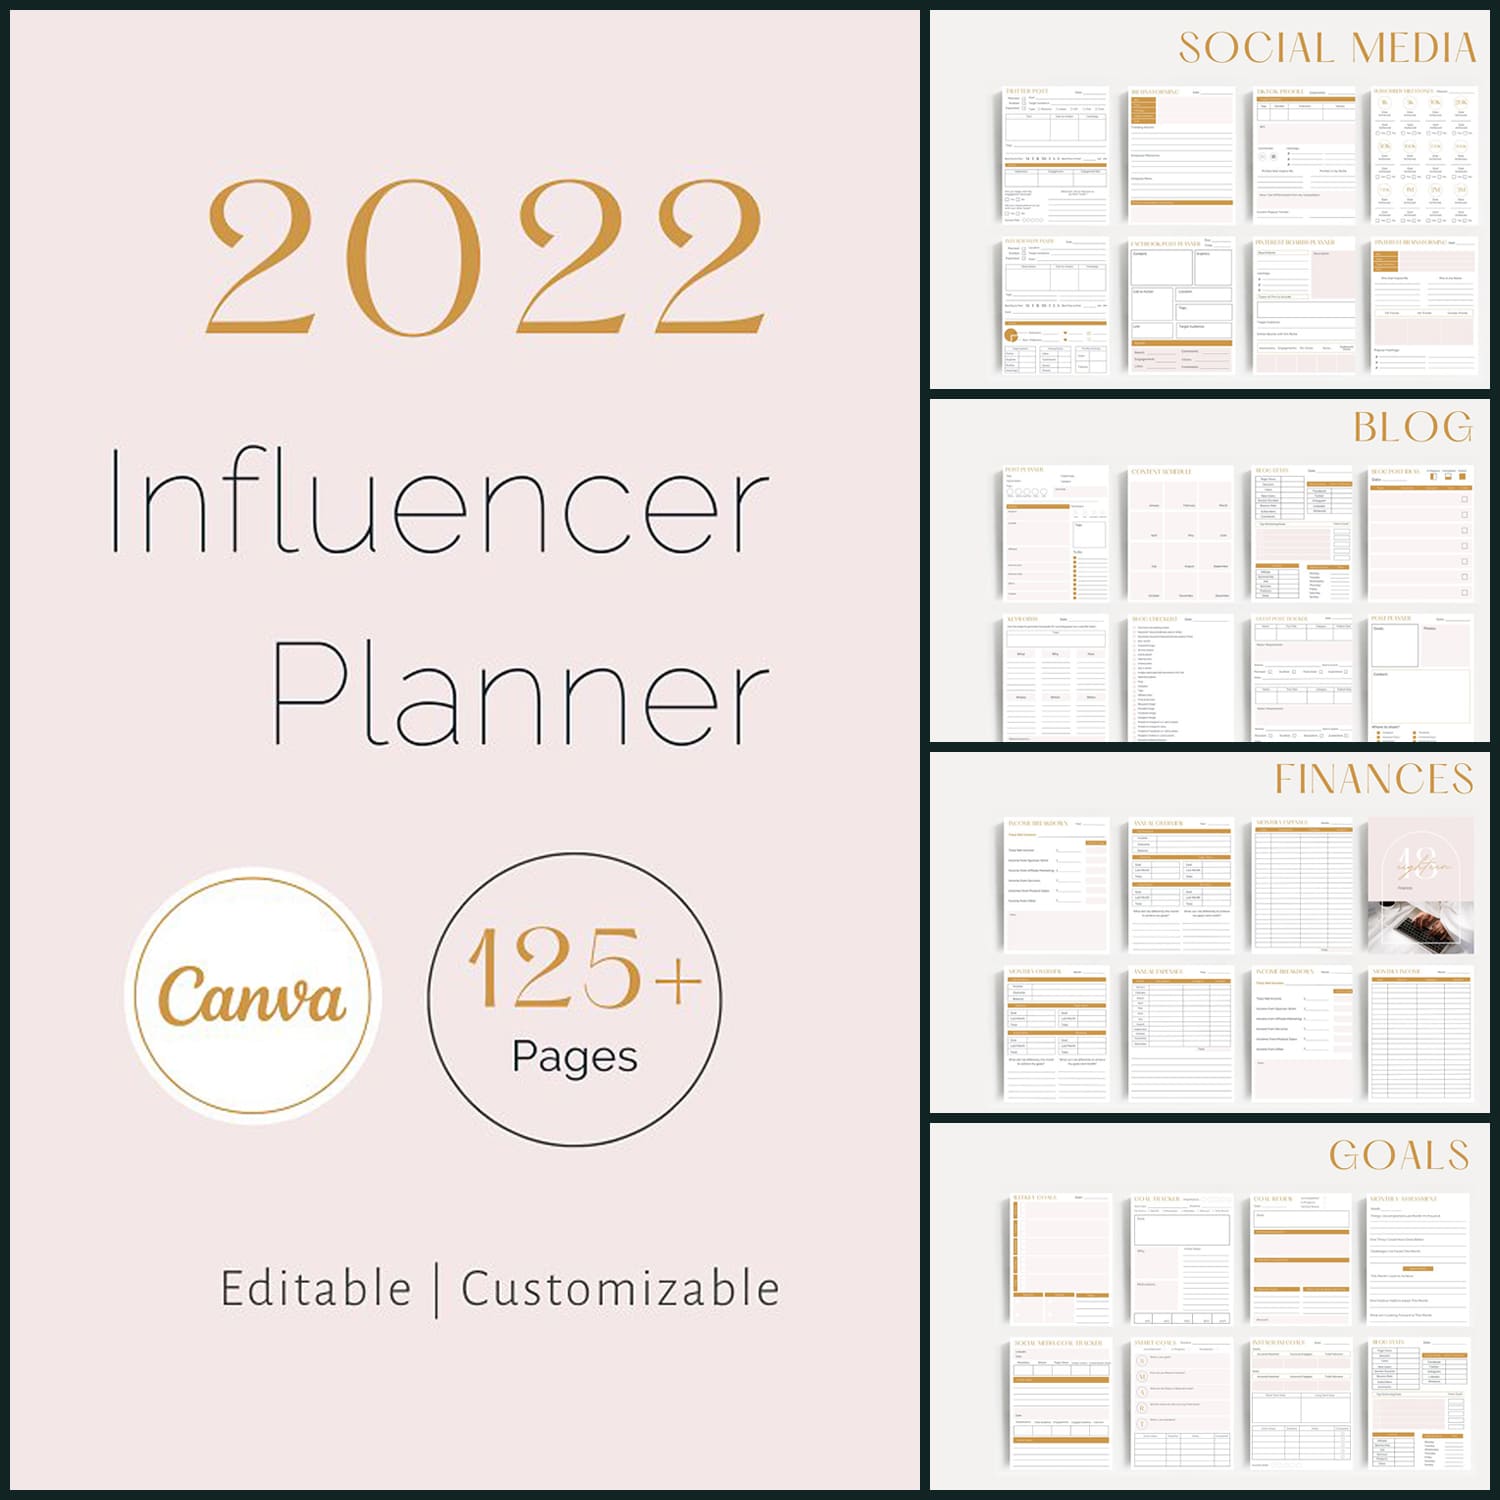 2022 Influencer Planner cover.